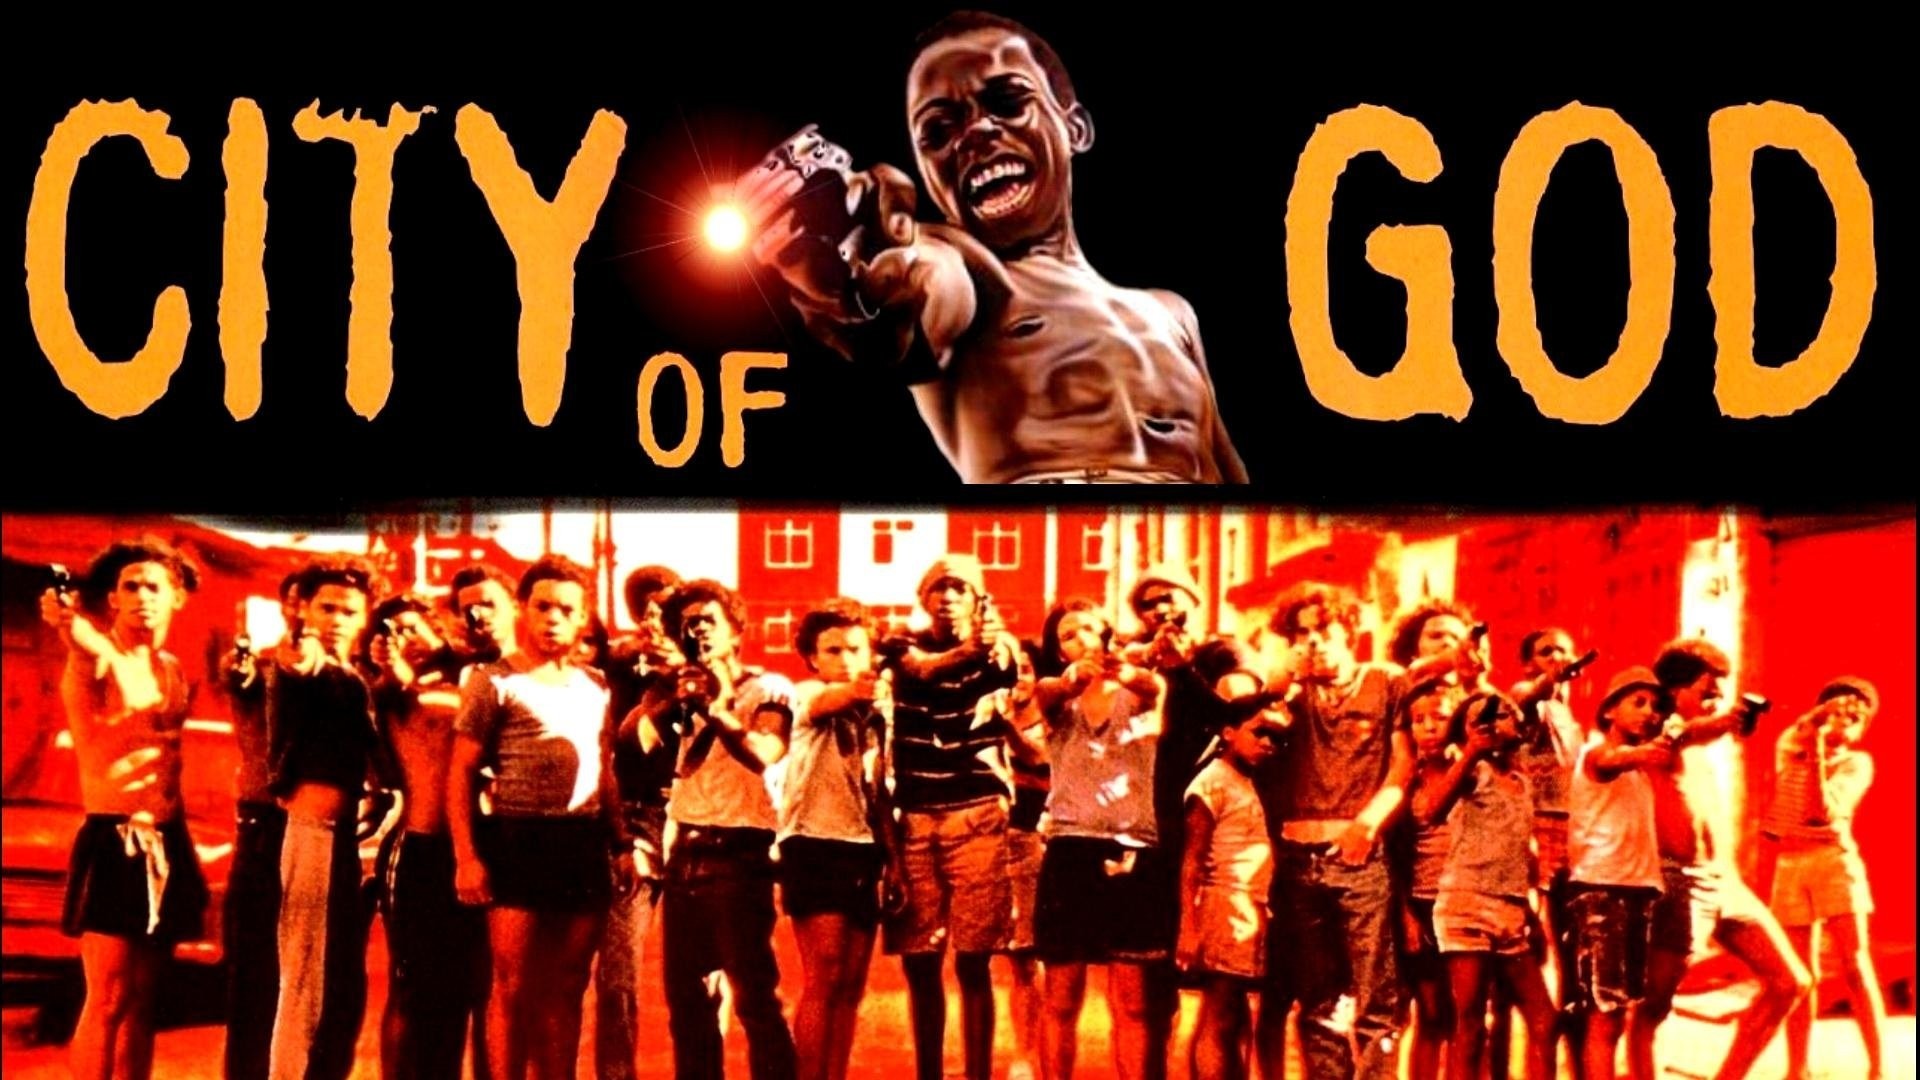 City Of God HD Wallpaper Background Image Id